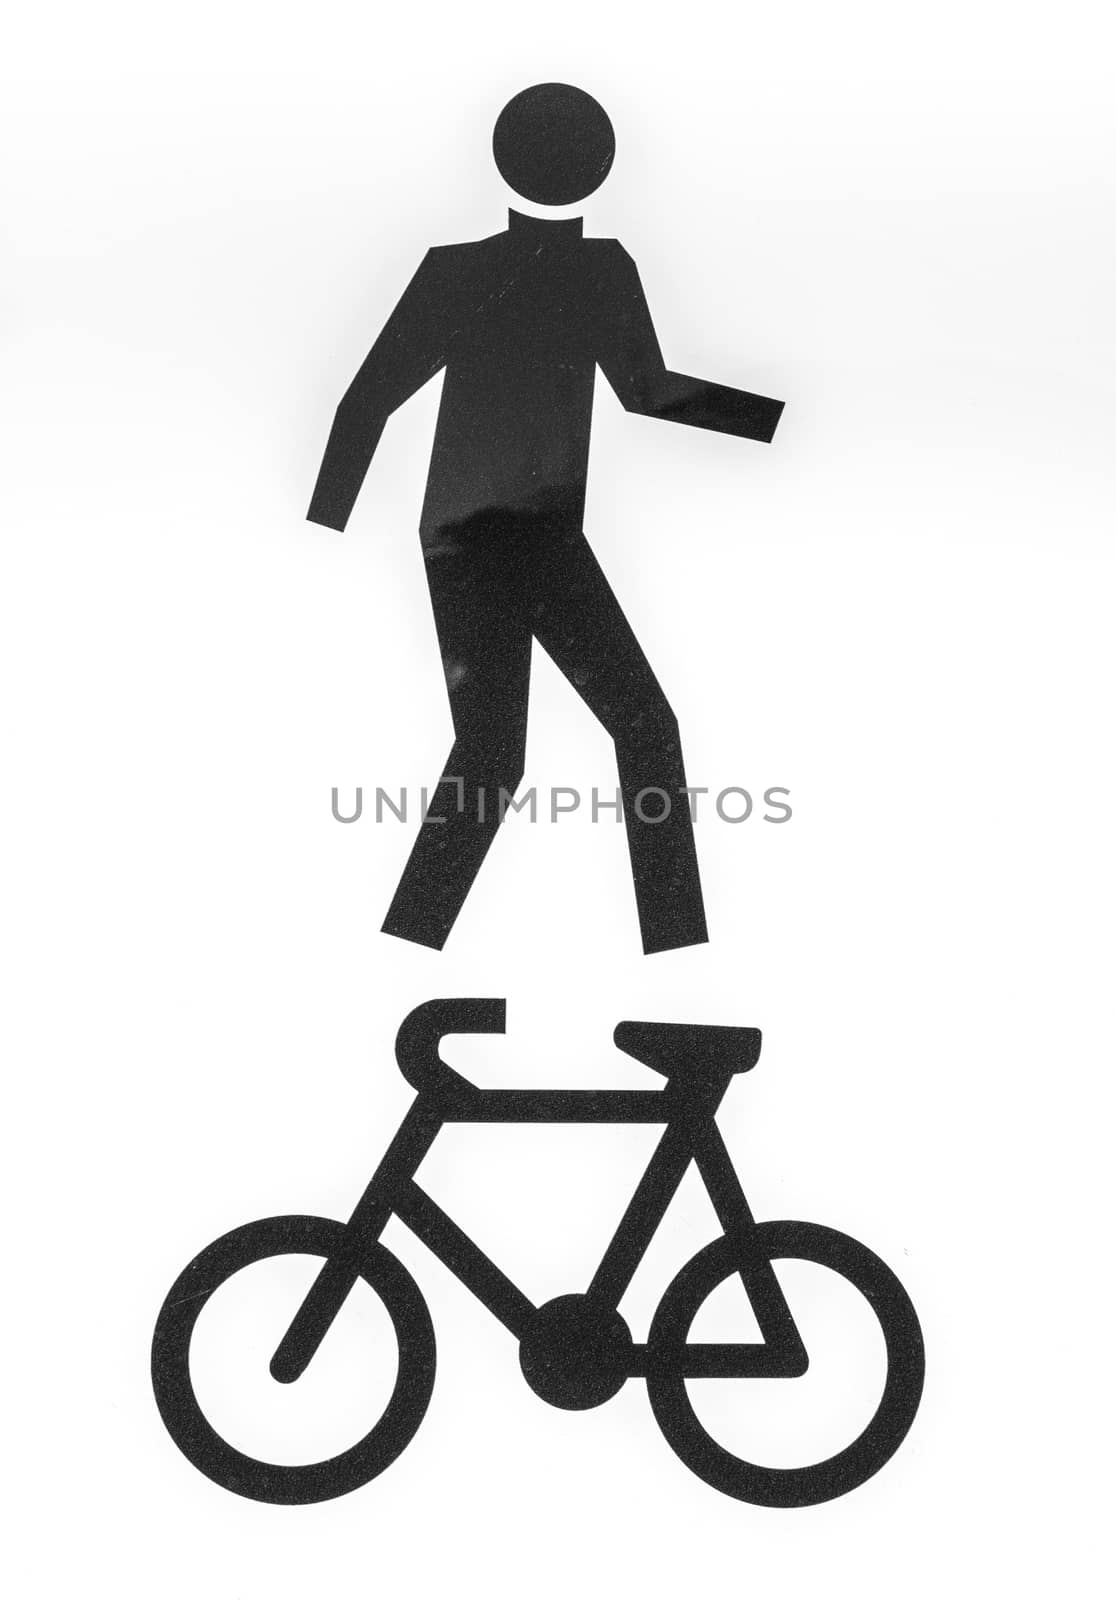 Bicycle and pedestrian lane road sign on pole post, large white square isolated bike cycling and walking walkway footpath route traffic roadside signage